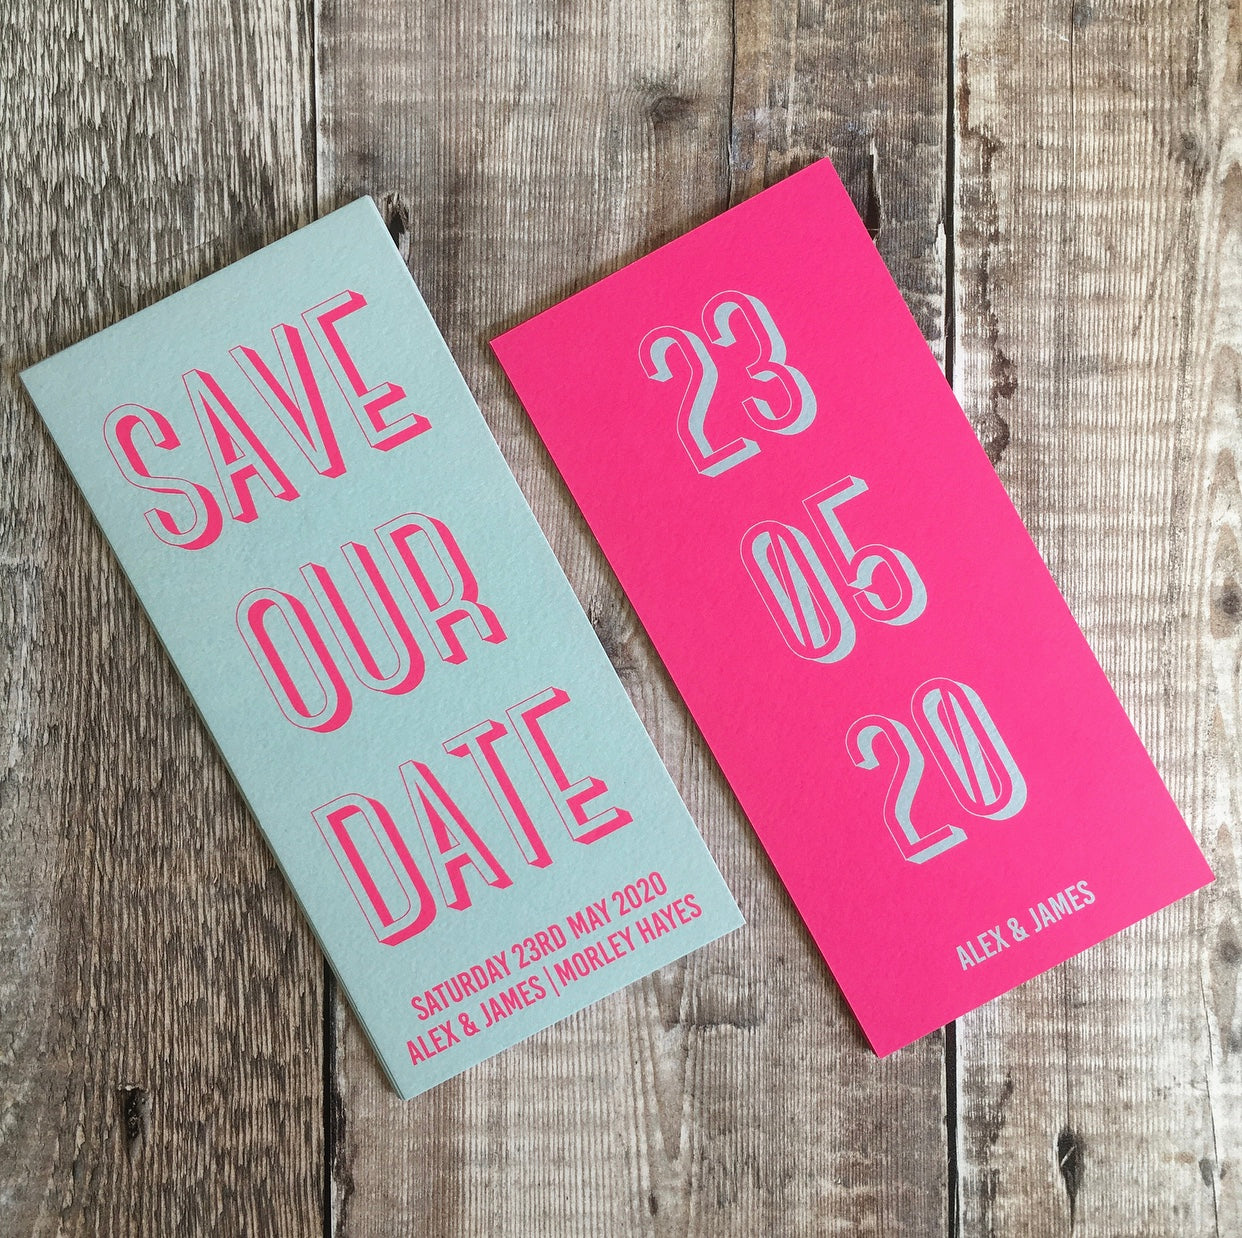 Bookmark-style wedding invitation/save the date. Front and back view. Front (left) has a teal blue background, with fluorescent pink text. Back (right) has a pink fluorescent background, with the date of the wedding in a teal colour. The overall style is typographic and bold.